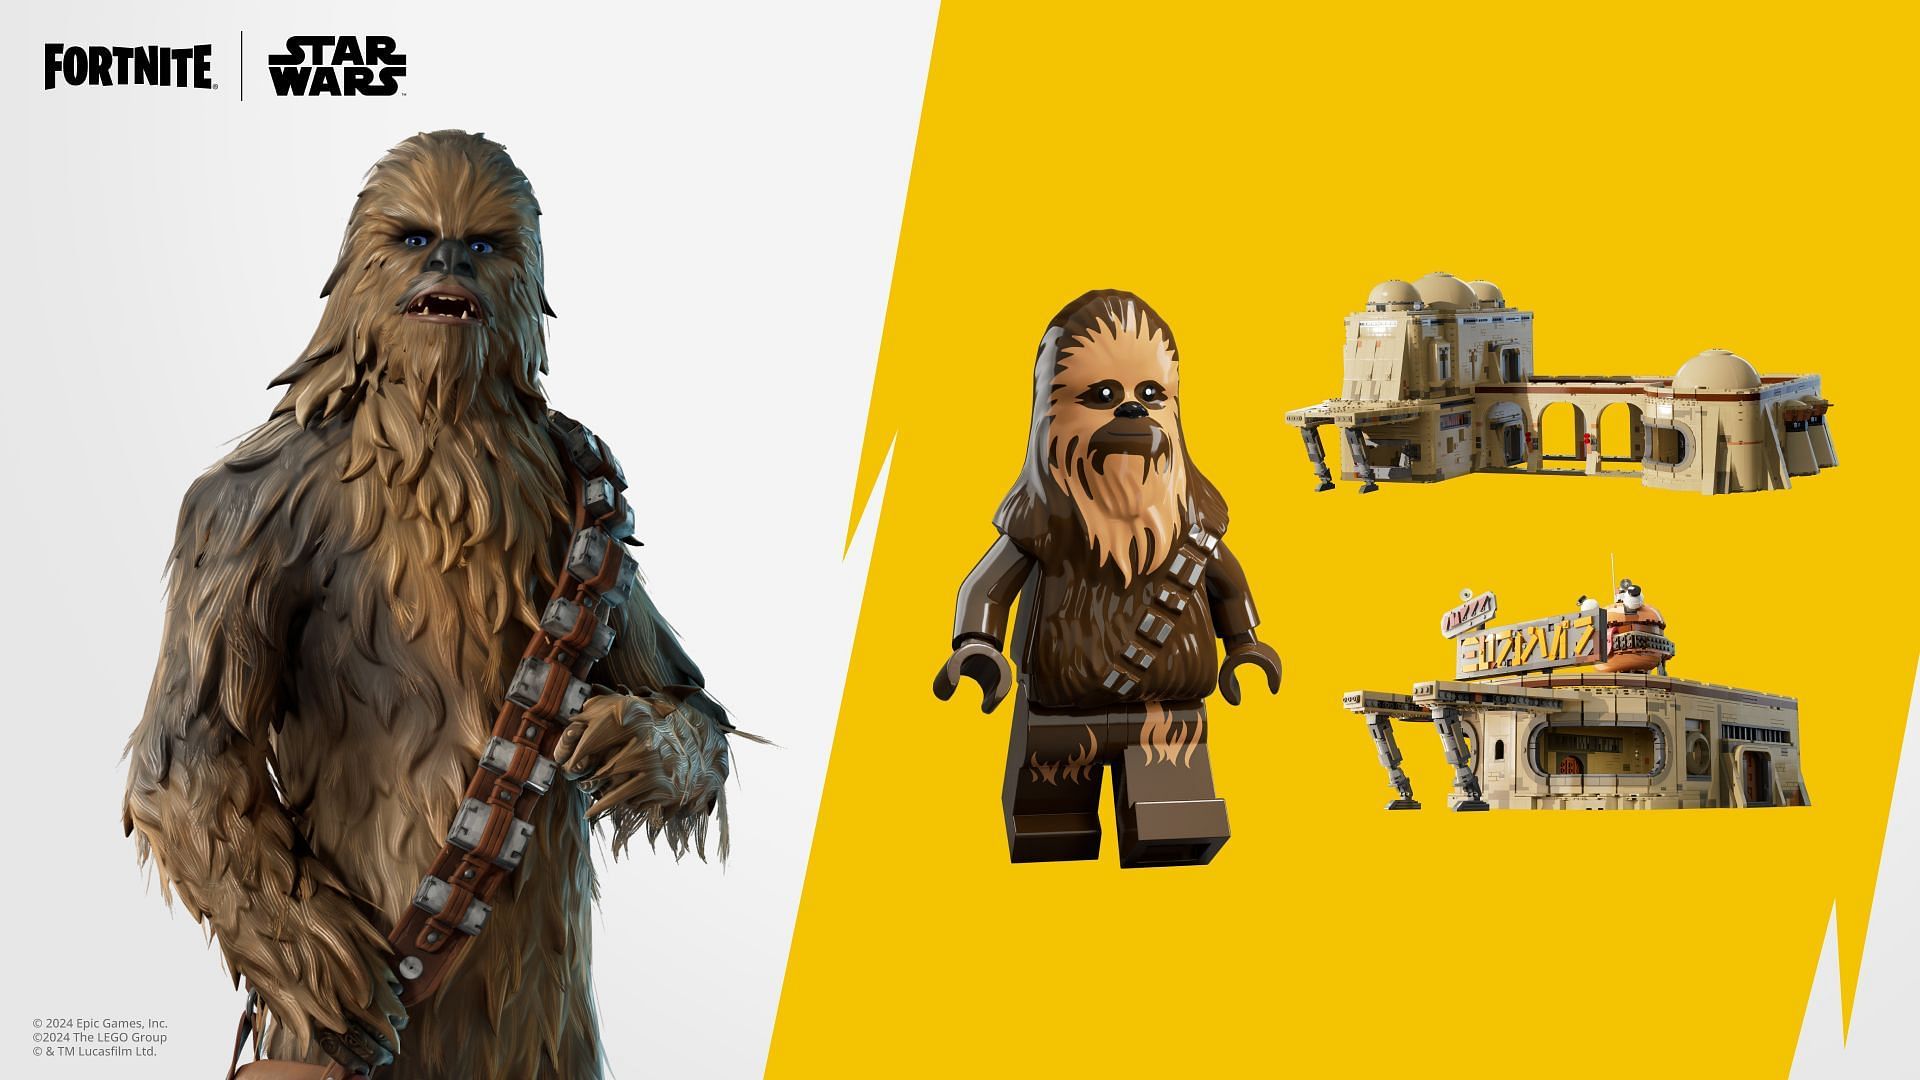 &ldquo;Wookie numbers&rdquo;: Fortnite community hilariously reacts to player&rsquo;s collection of Chewbacca presets